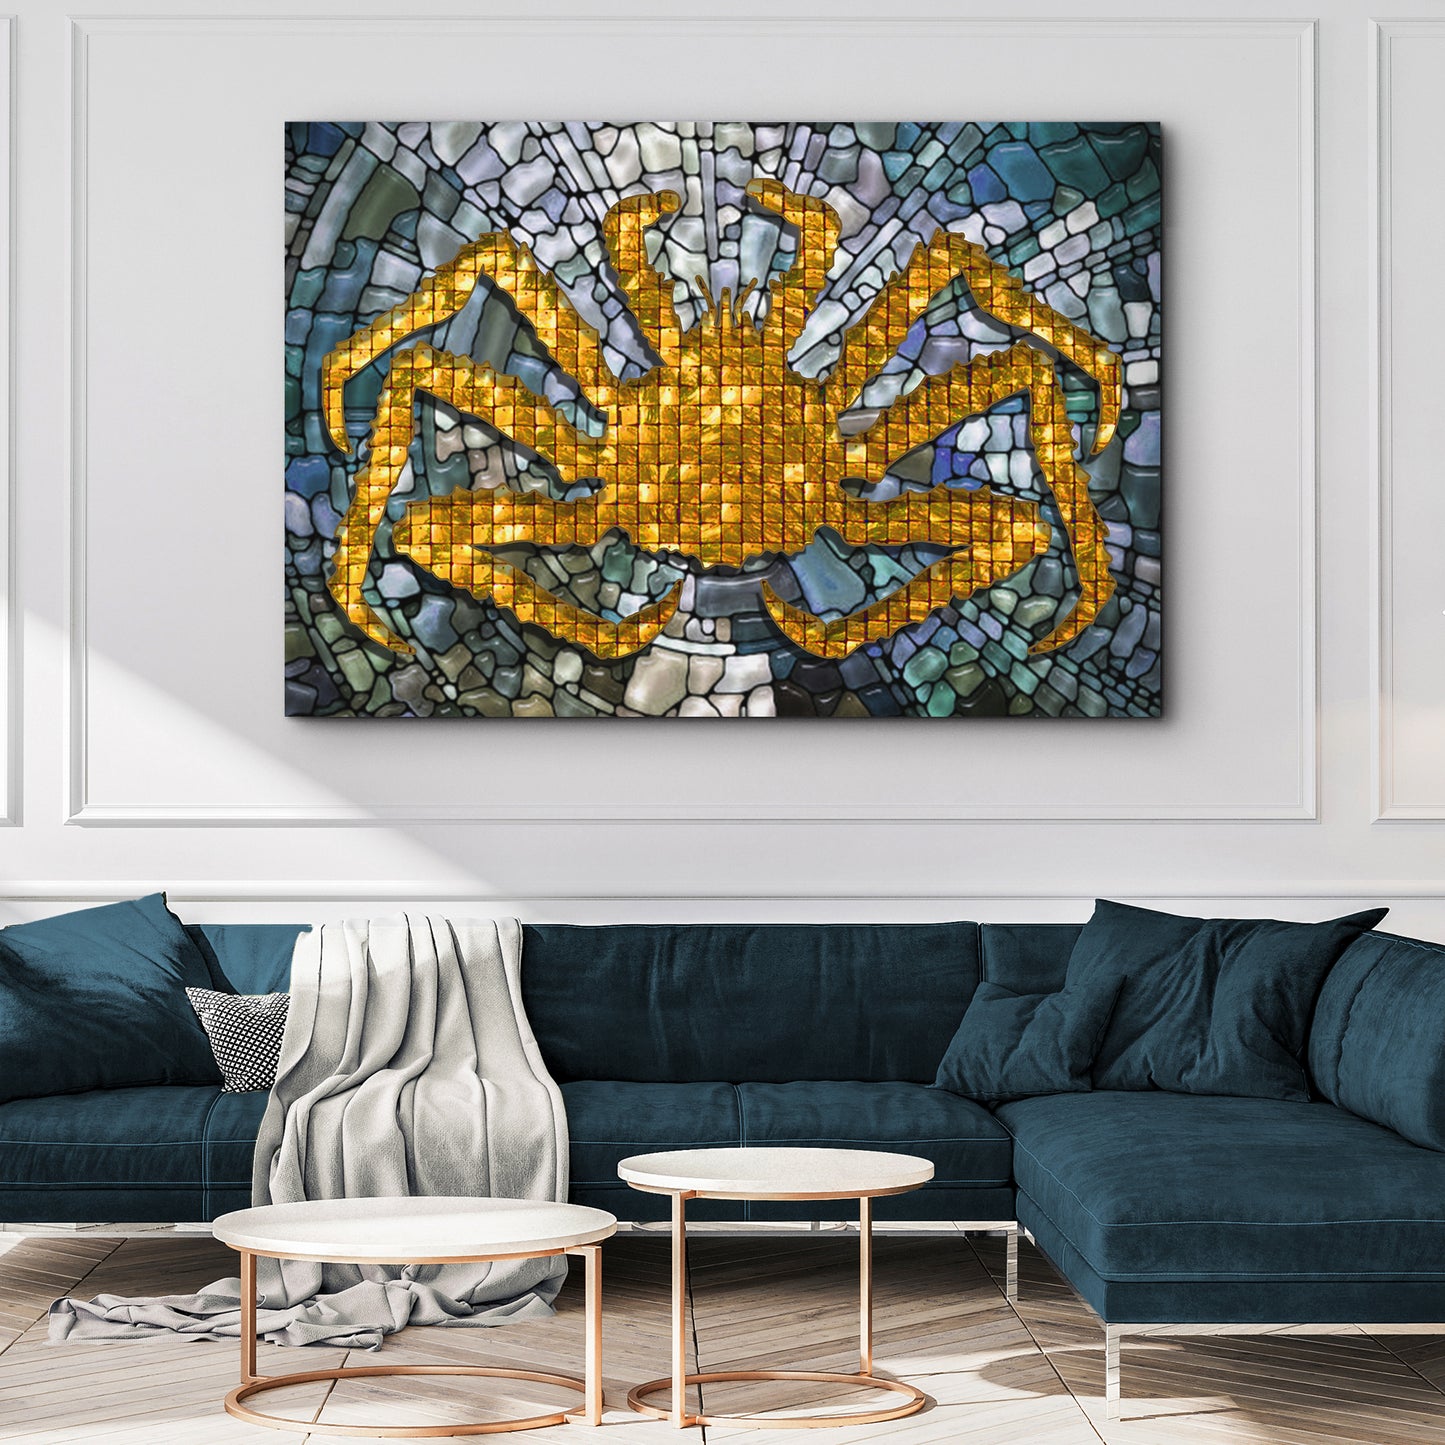 King Crab Mosaic Décor Wall Art - Image by Tailored Canvases